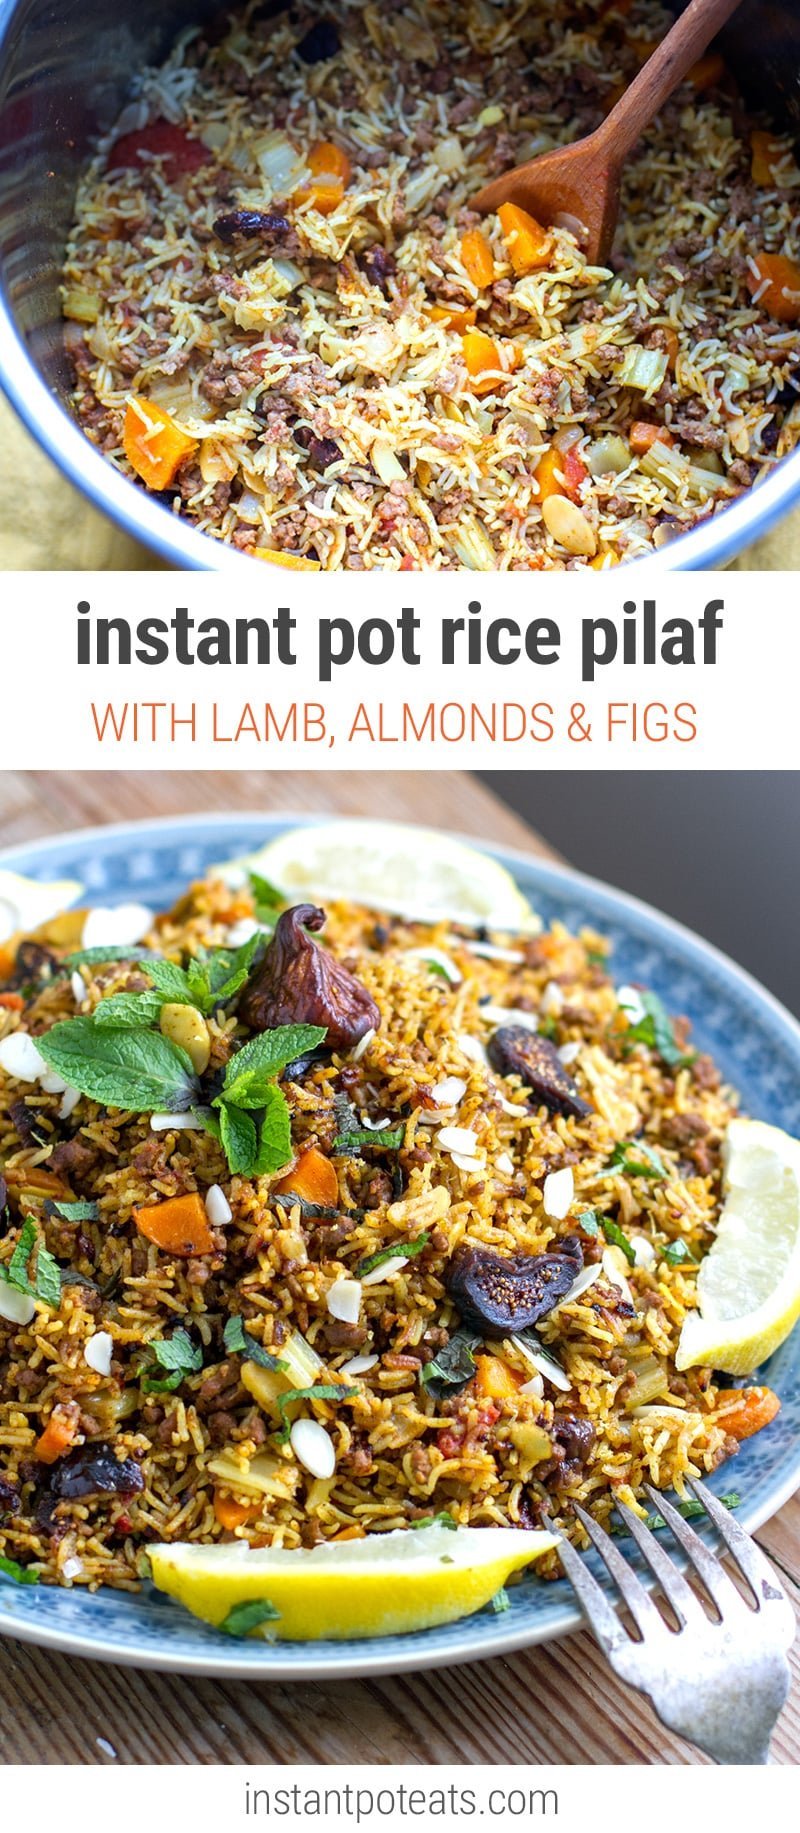 Instant Pot Rice Pilaf With Lamb, Almonds & Figs 